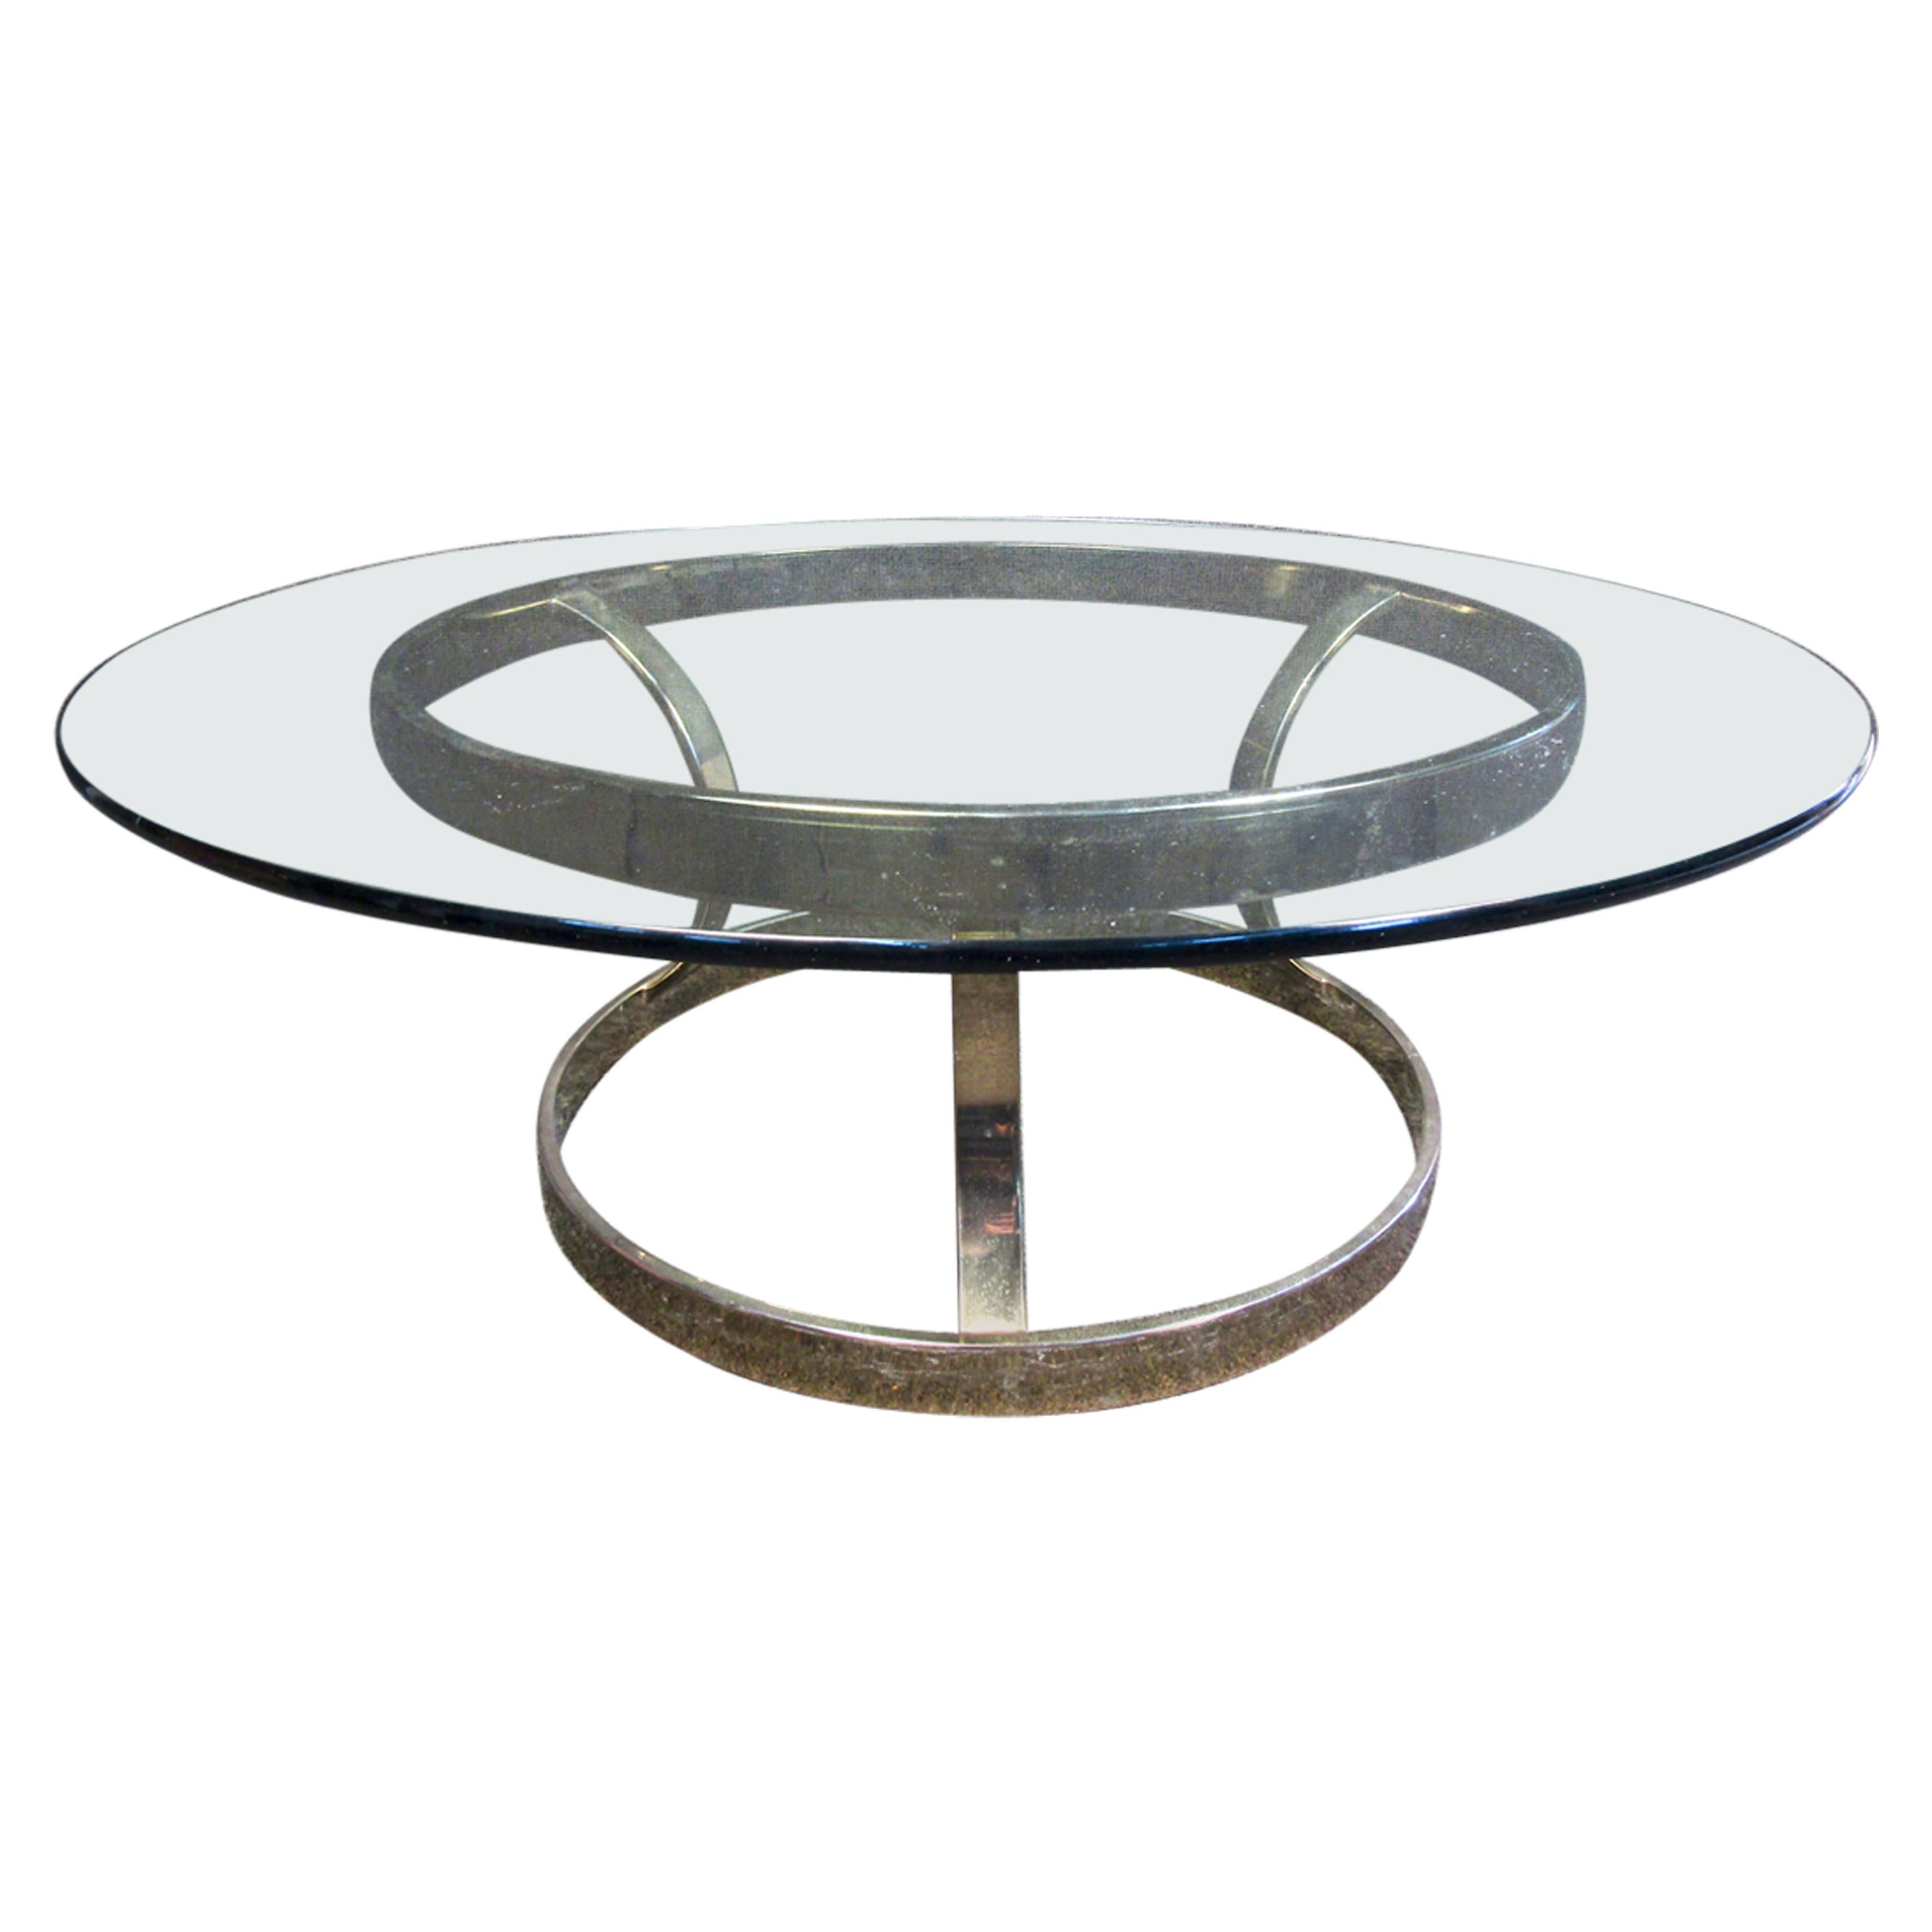 Table basse circulaire mi-siècle moderne